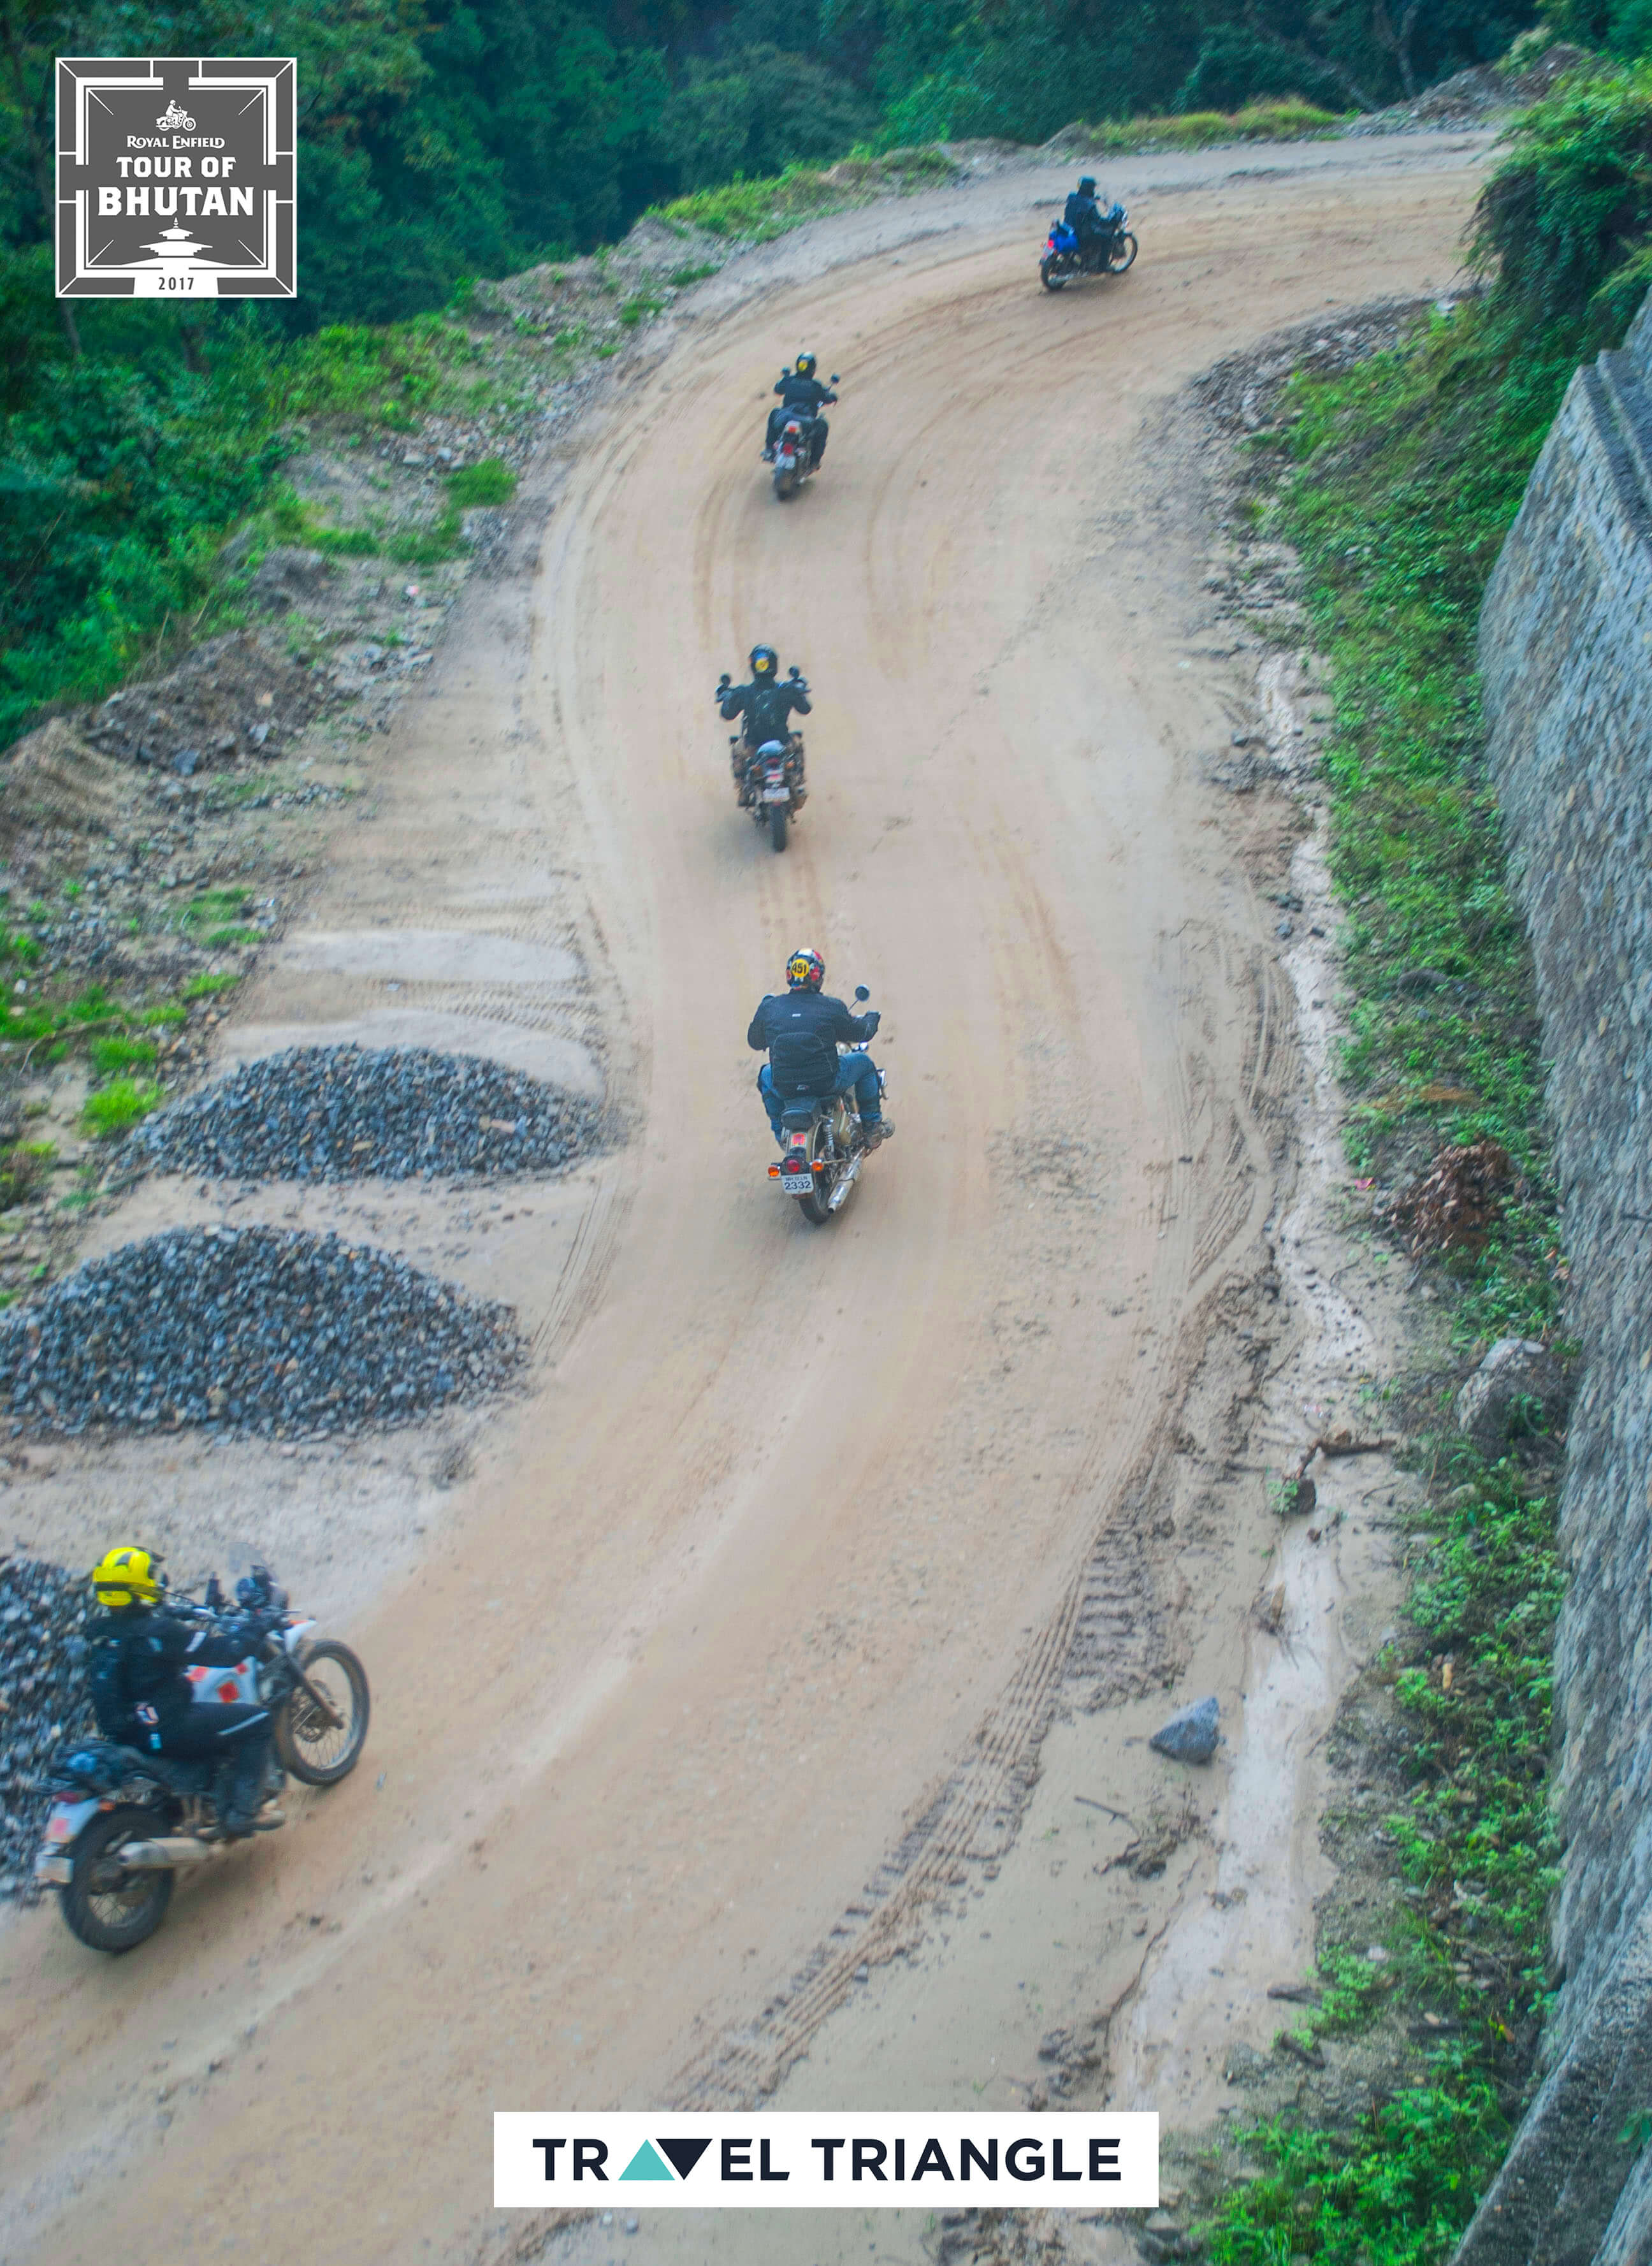 Mongar to Trashigang: the riders making their way together